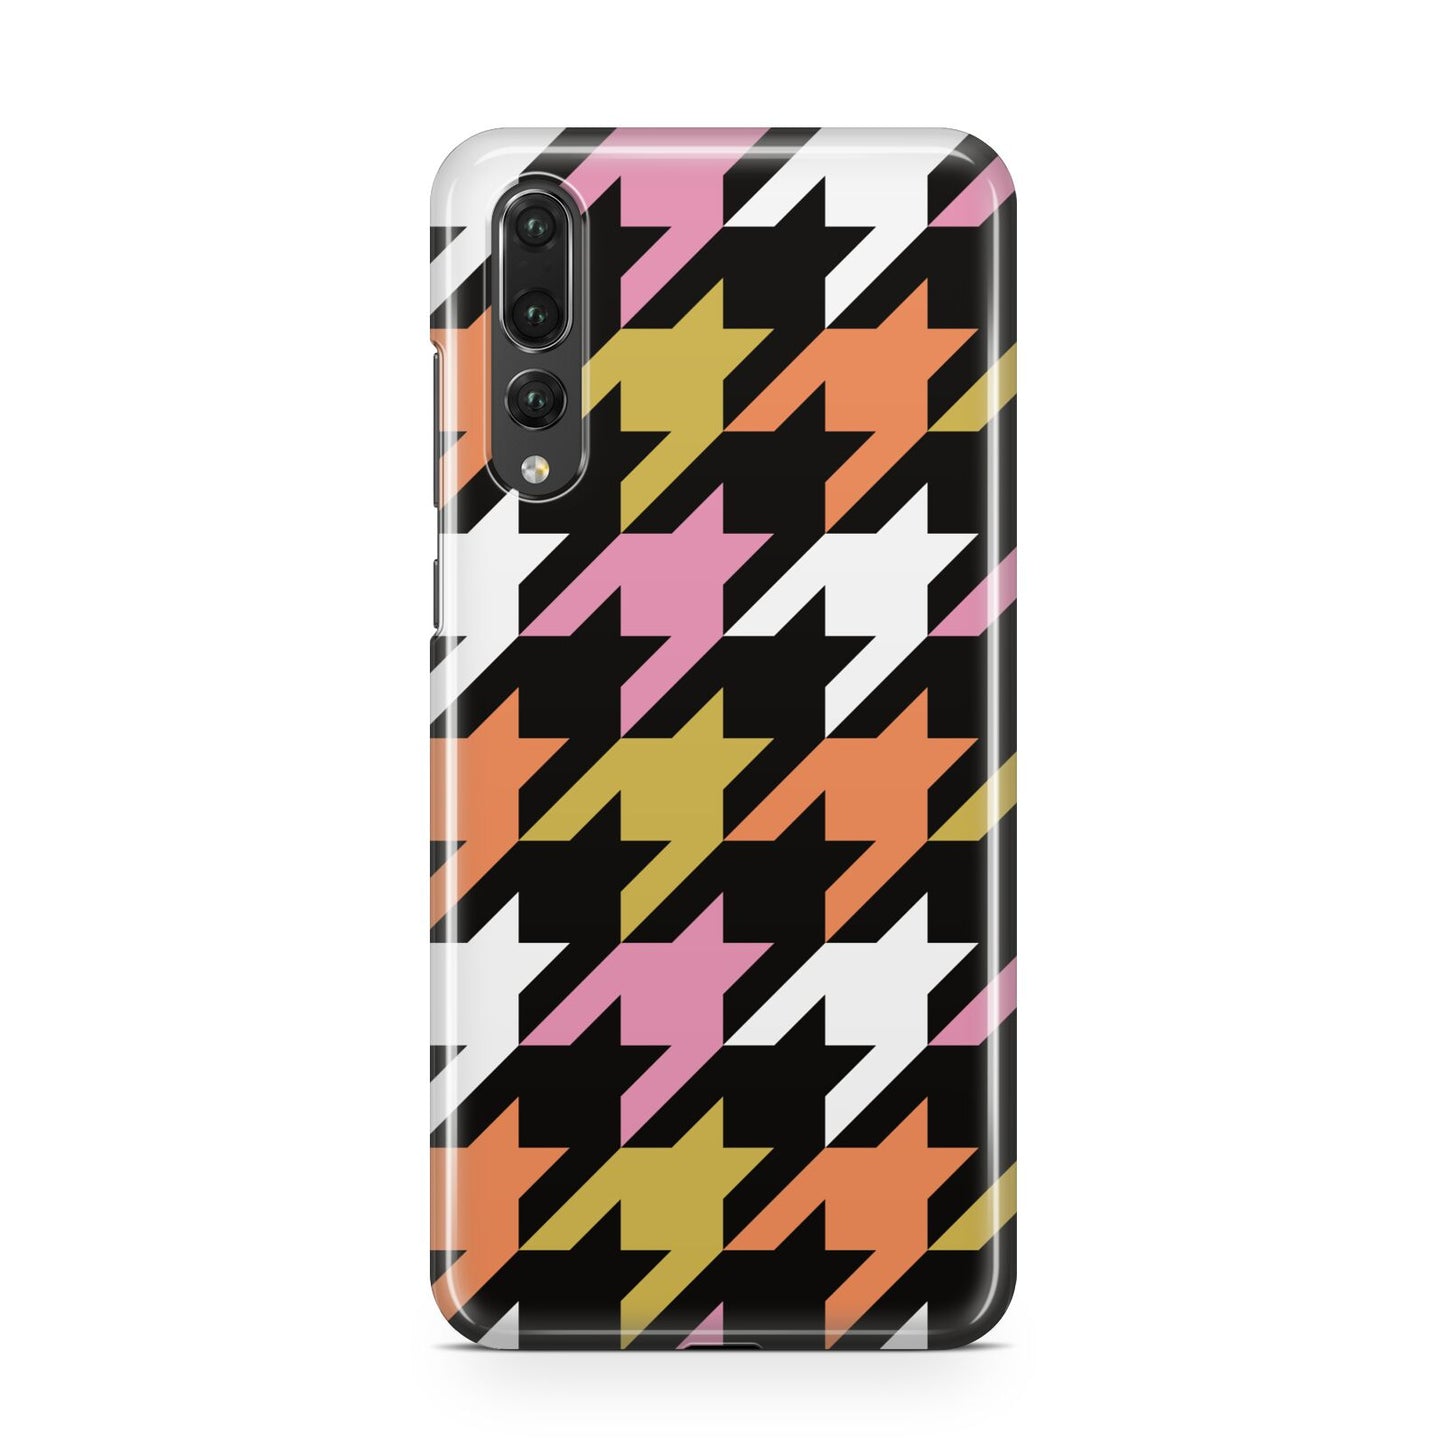 Retro Houndstooth Huawei P20 Pro Phone Case